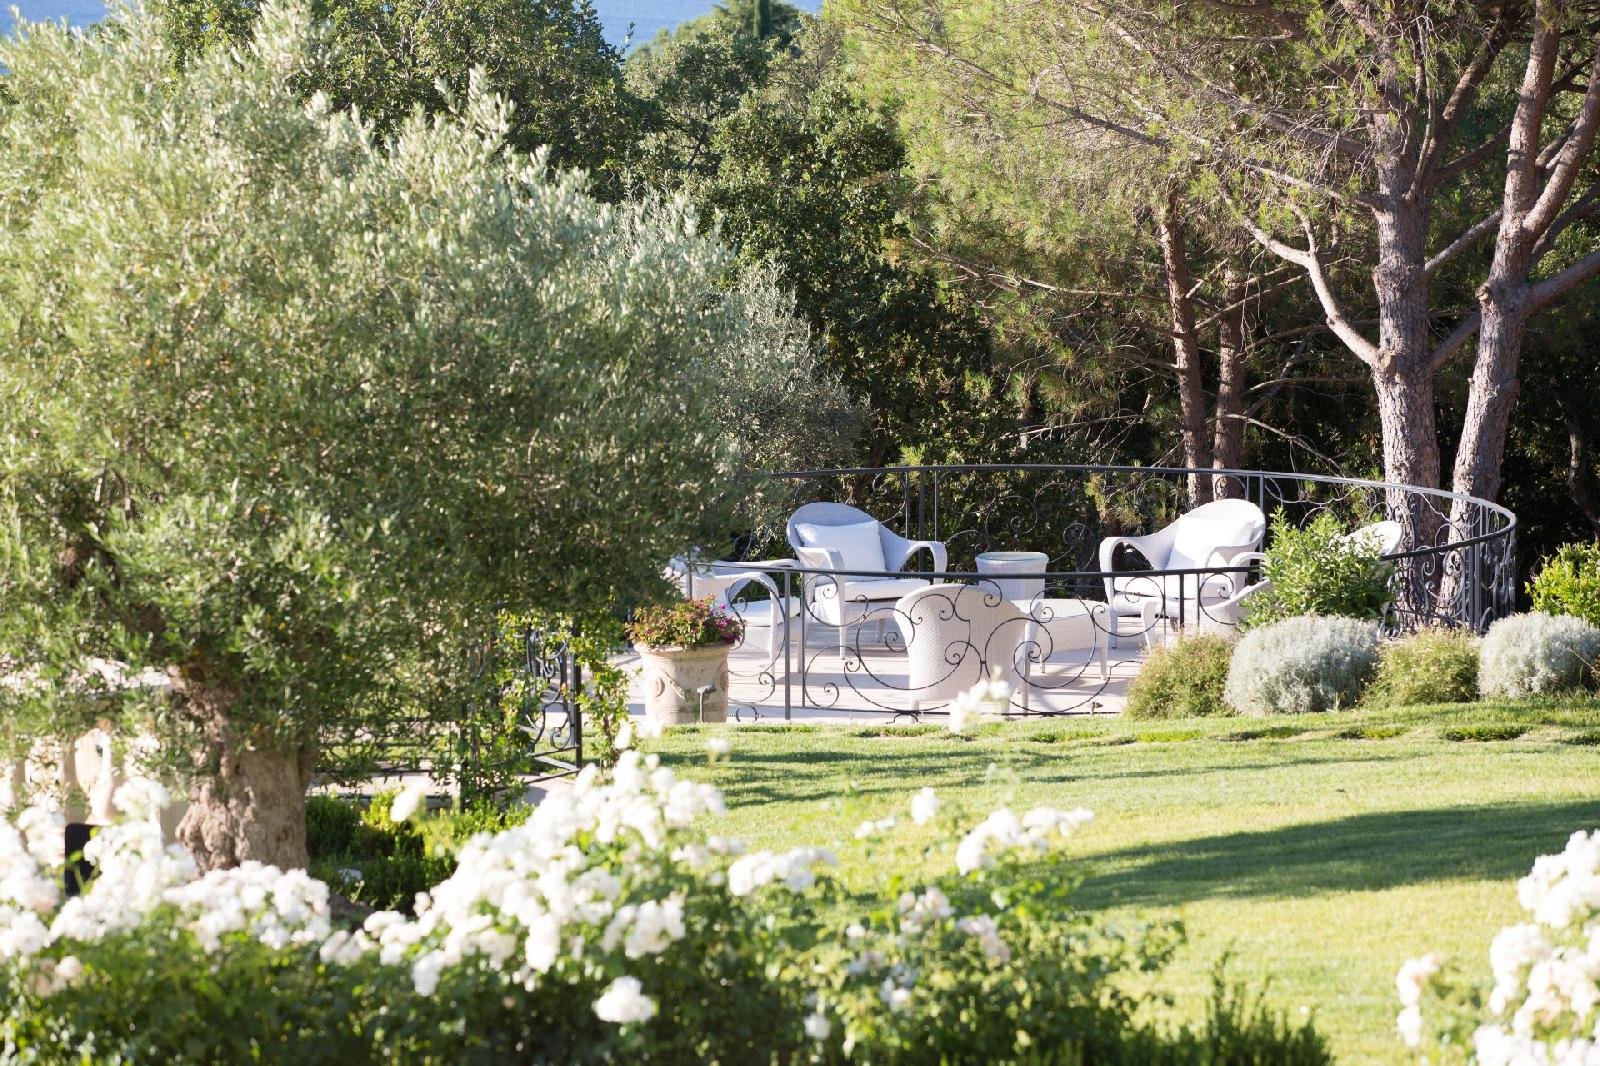 Francis York Iconic French Riviera Villa Overlooking the Bay of Saint Tropez 1.jpeg